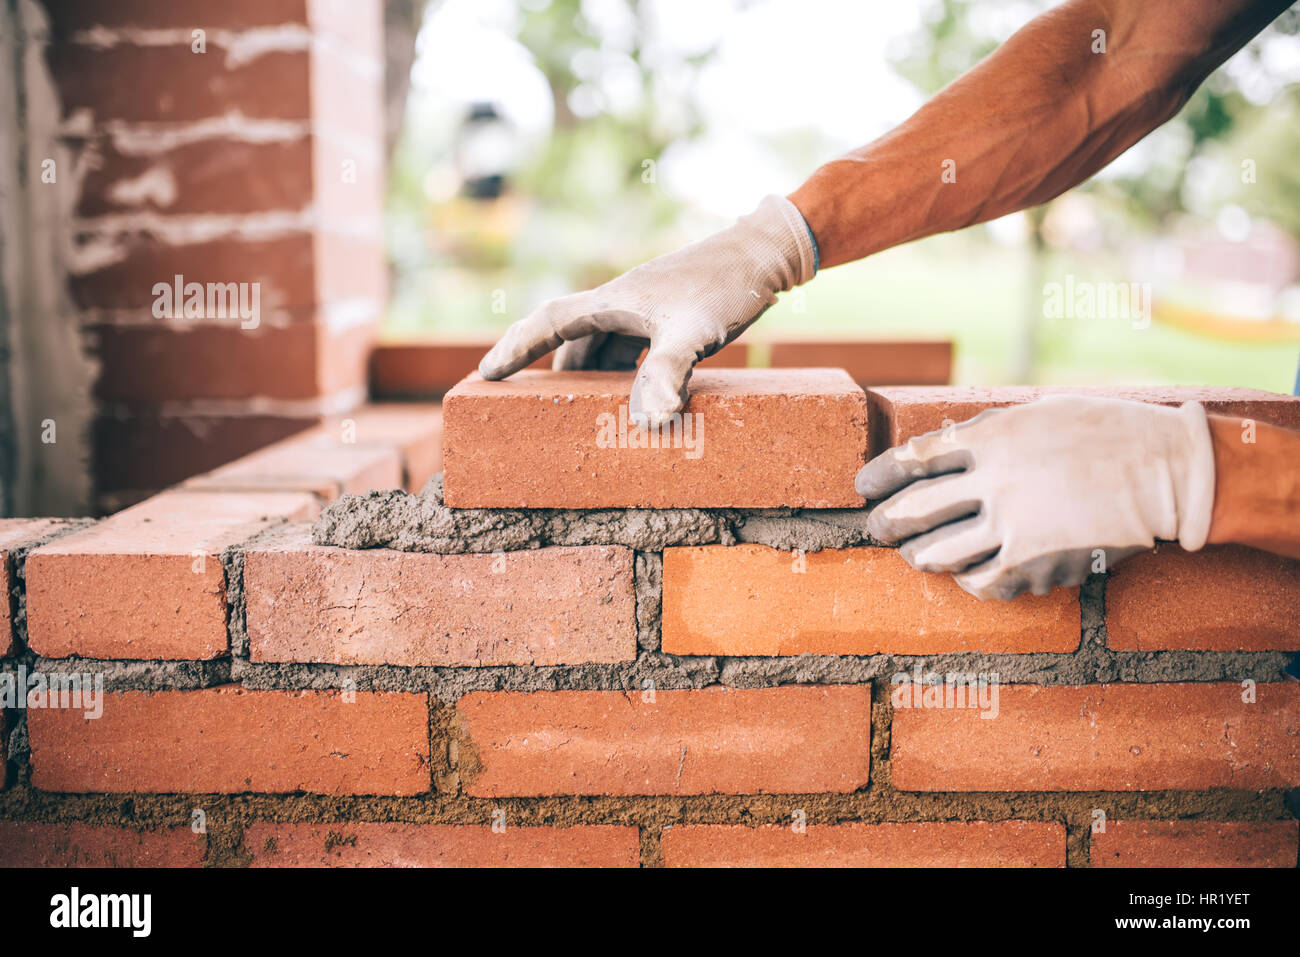 professional construction worker laying bricks and building barbecue in industrial site. Detail of hand adjusting bricks Stock Photo